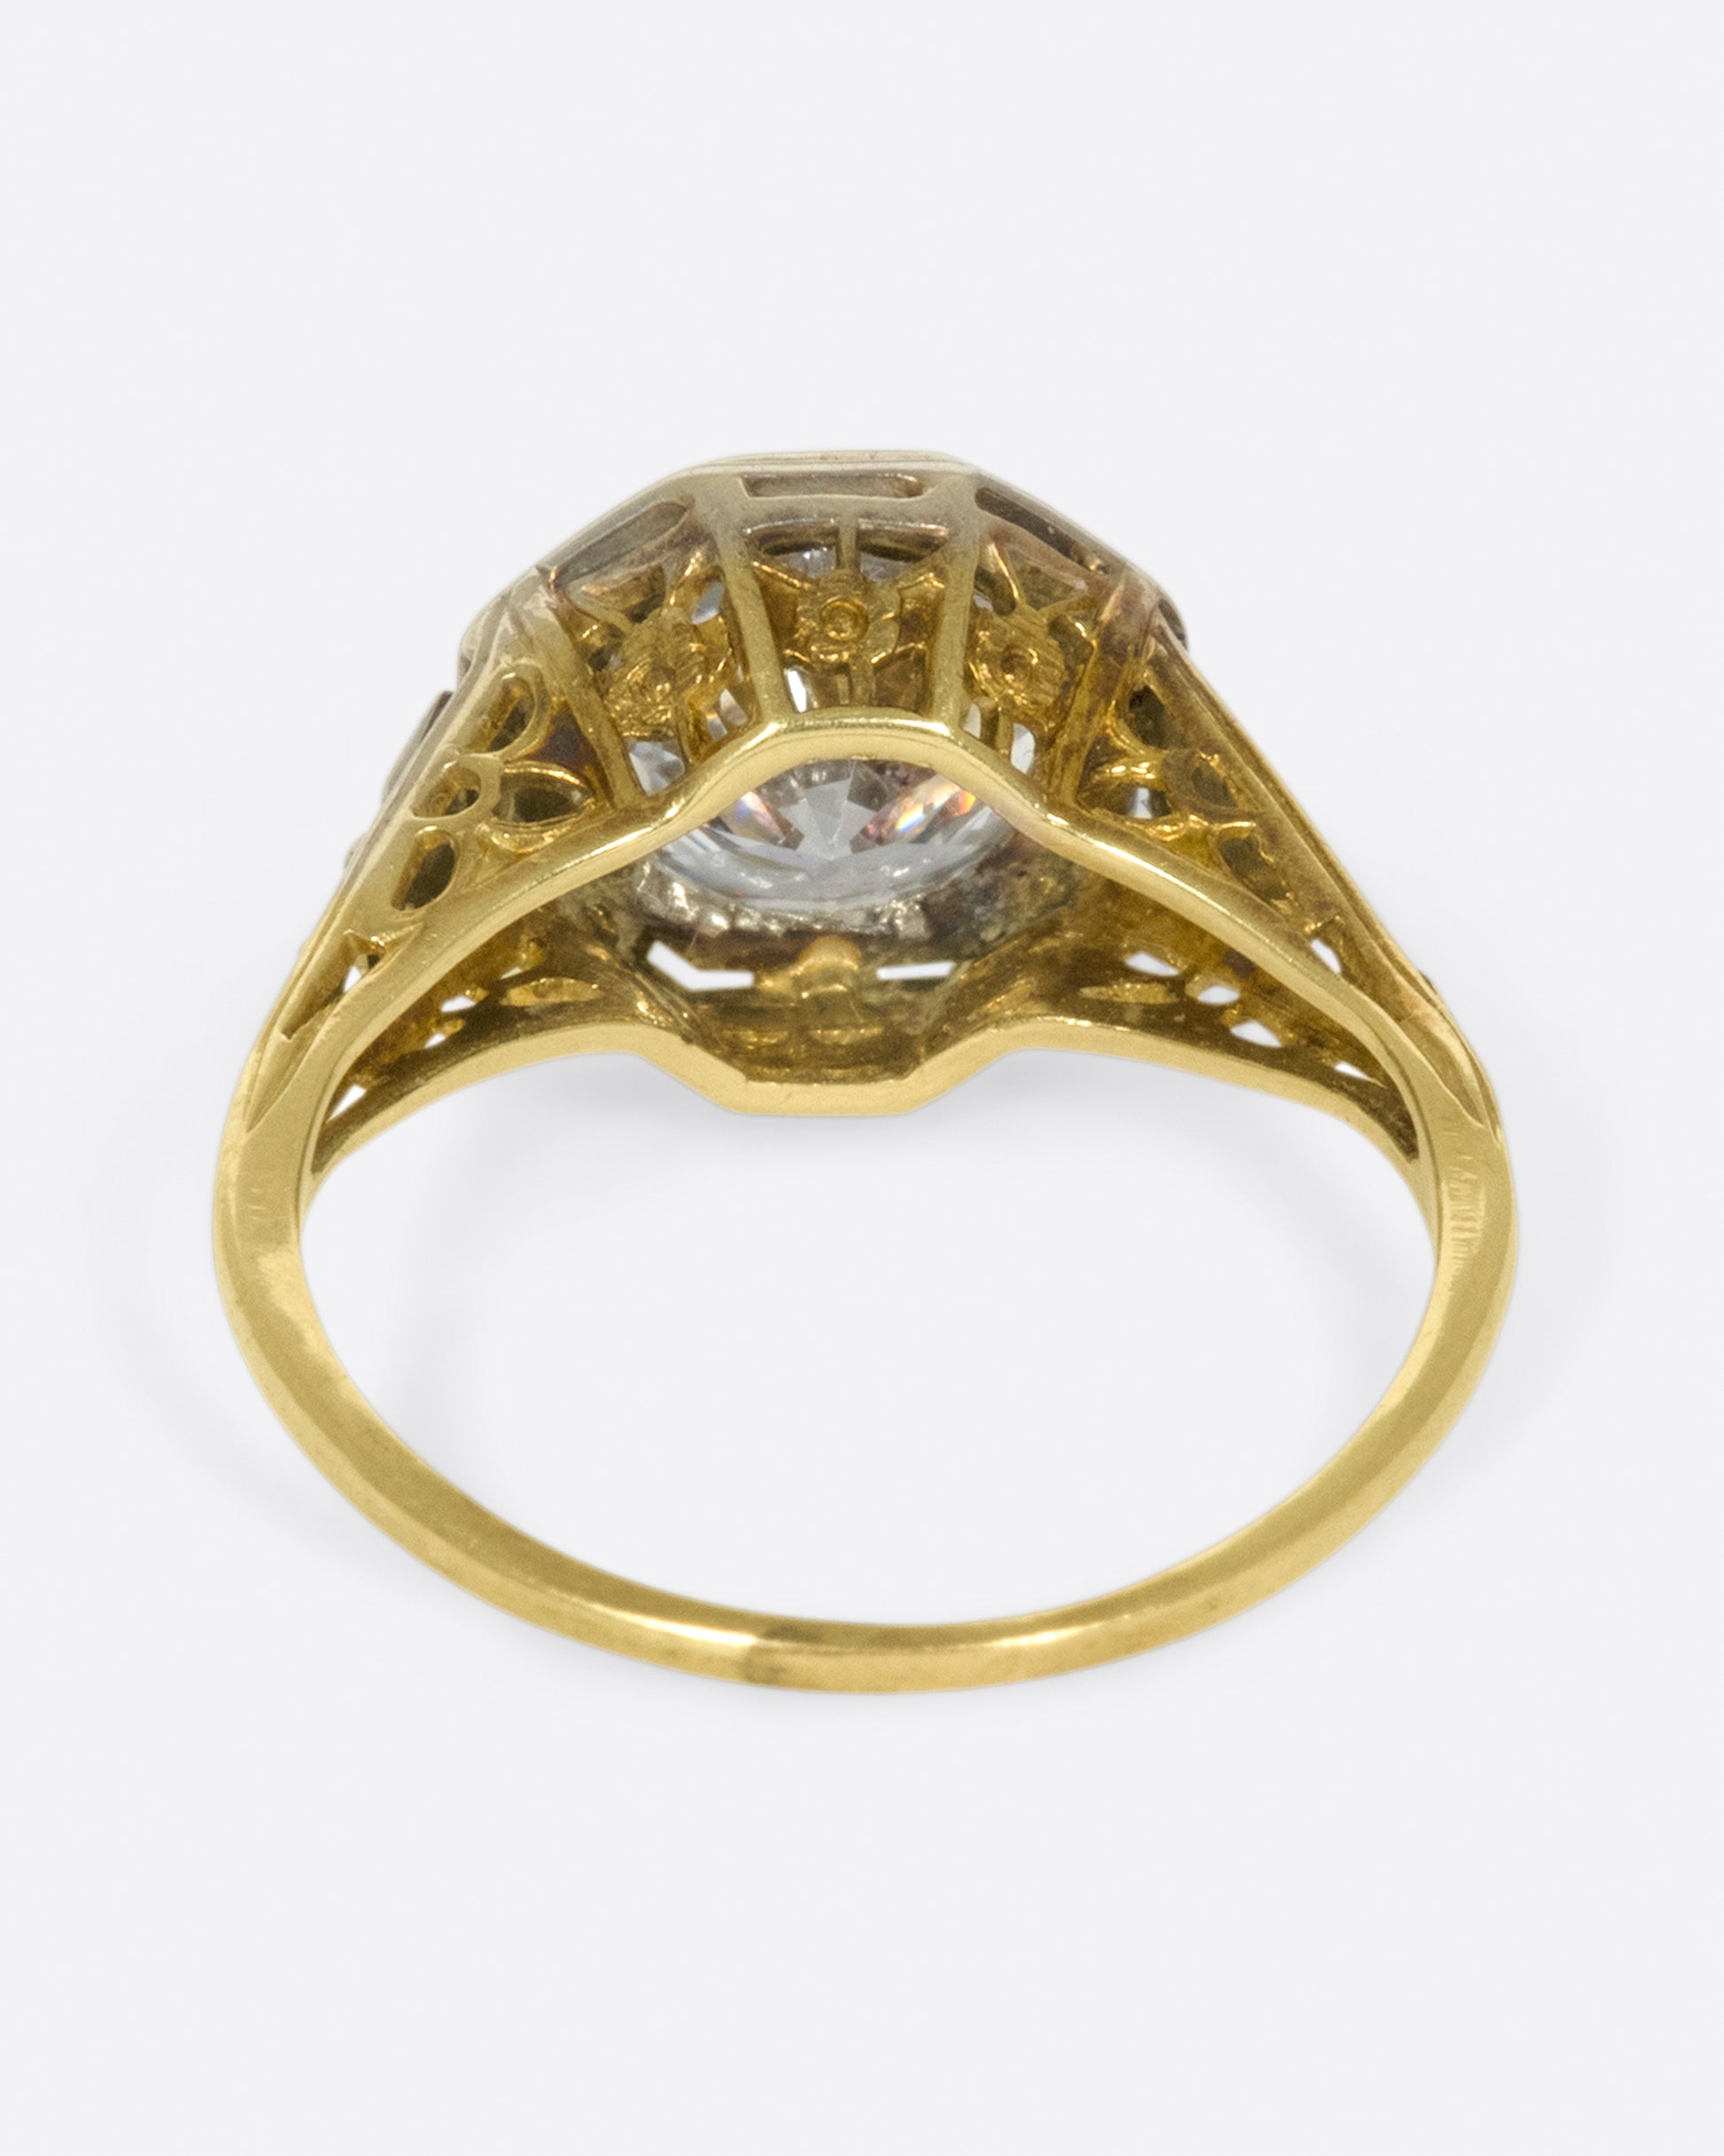 Mixed metals, intricate setting, large diamond; the ultimate vintage engagement ring.